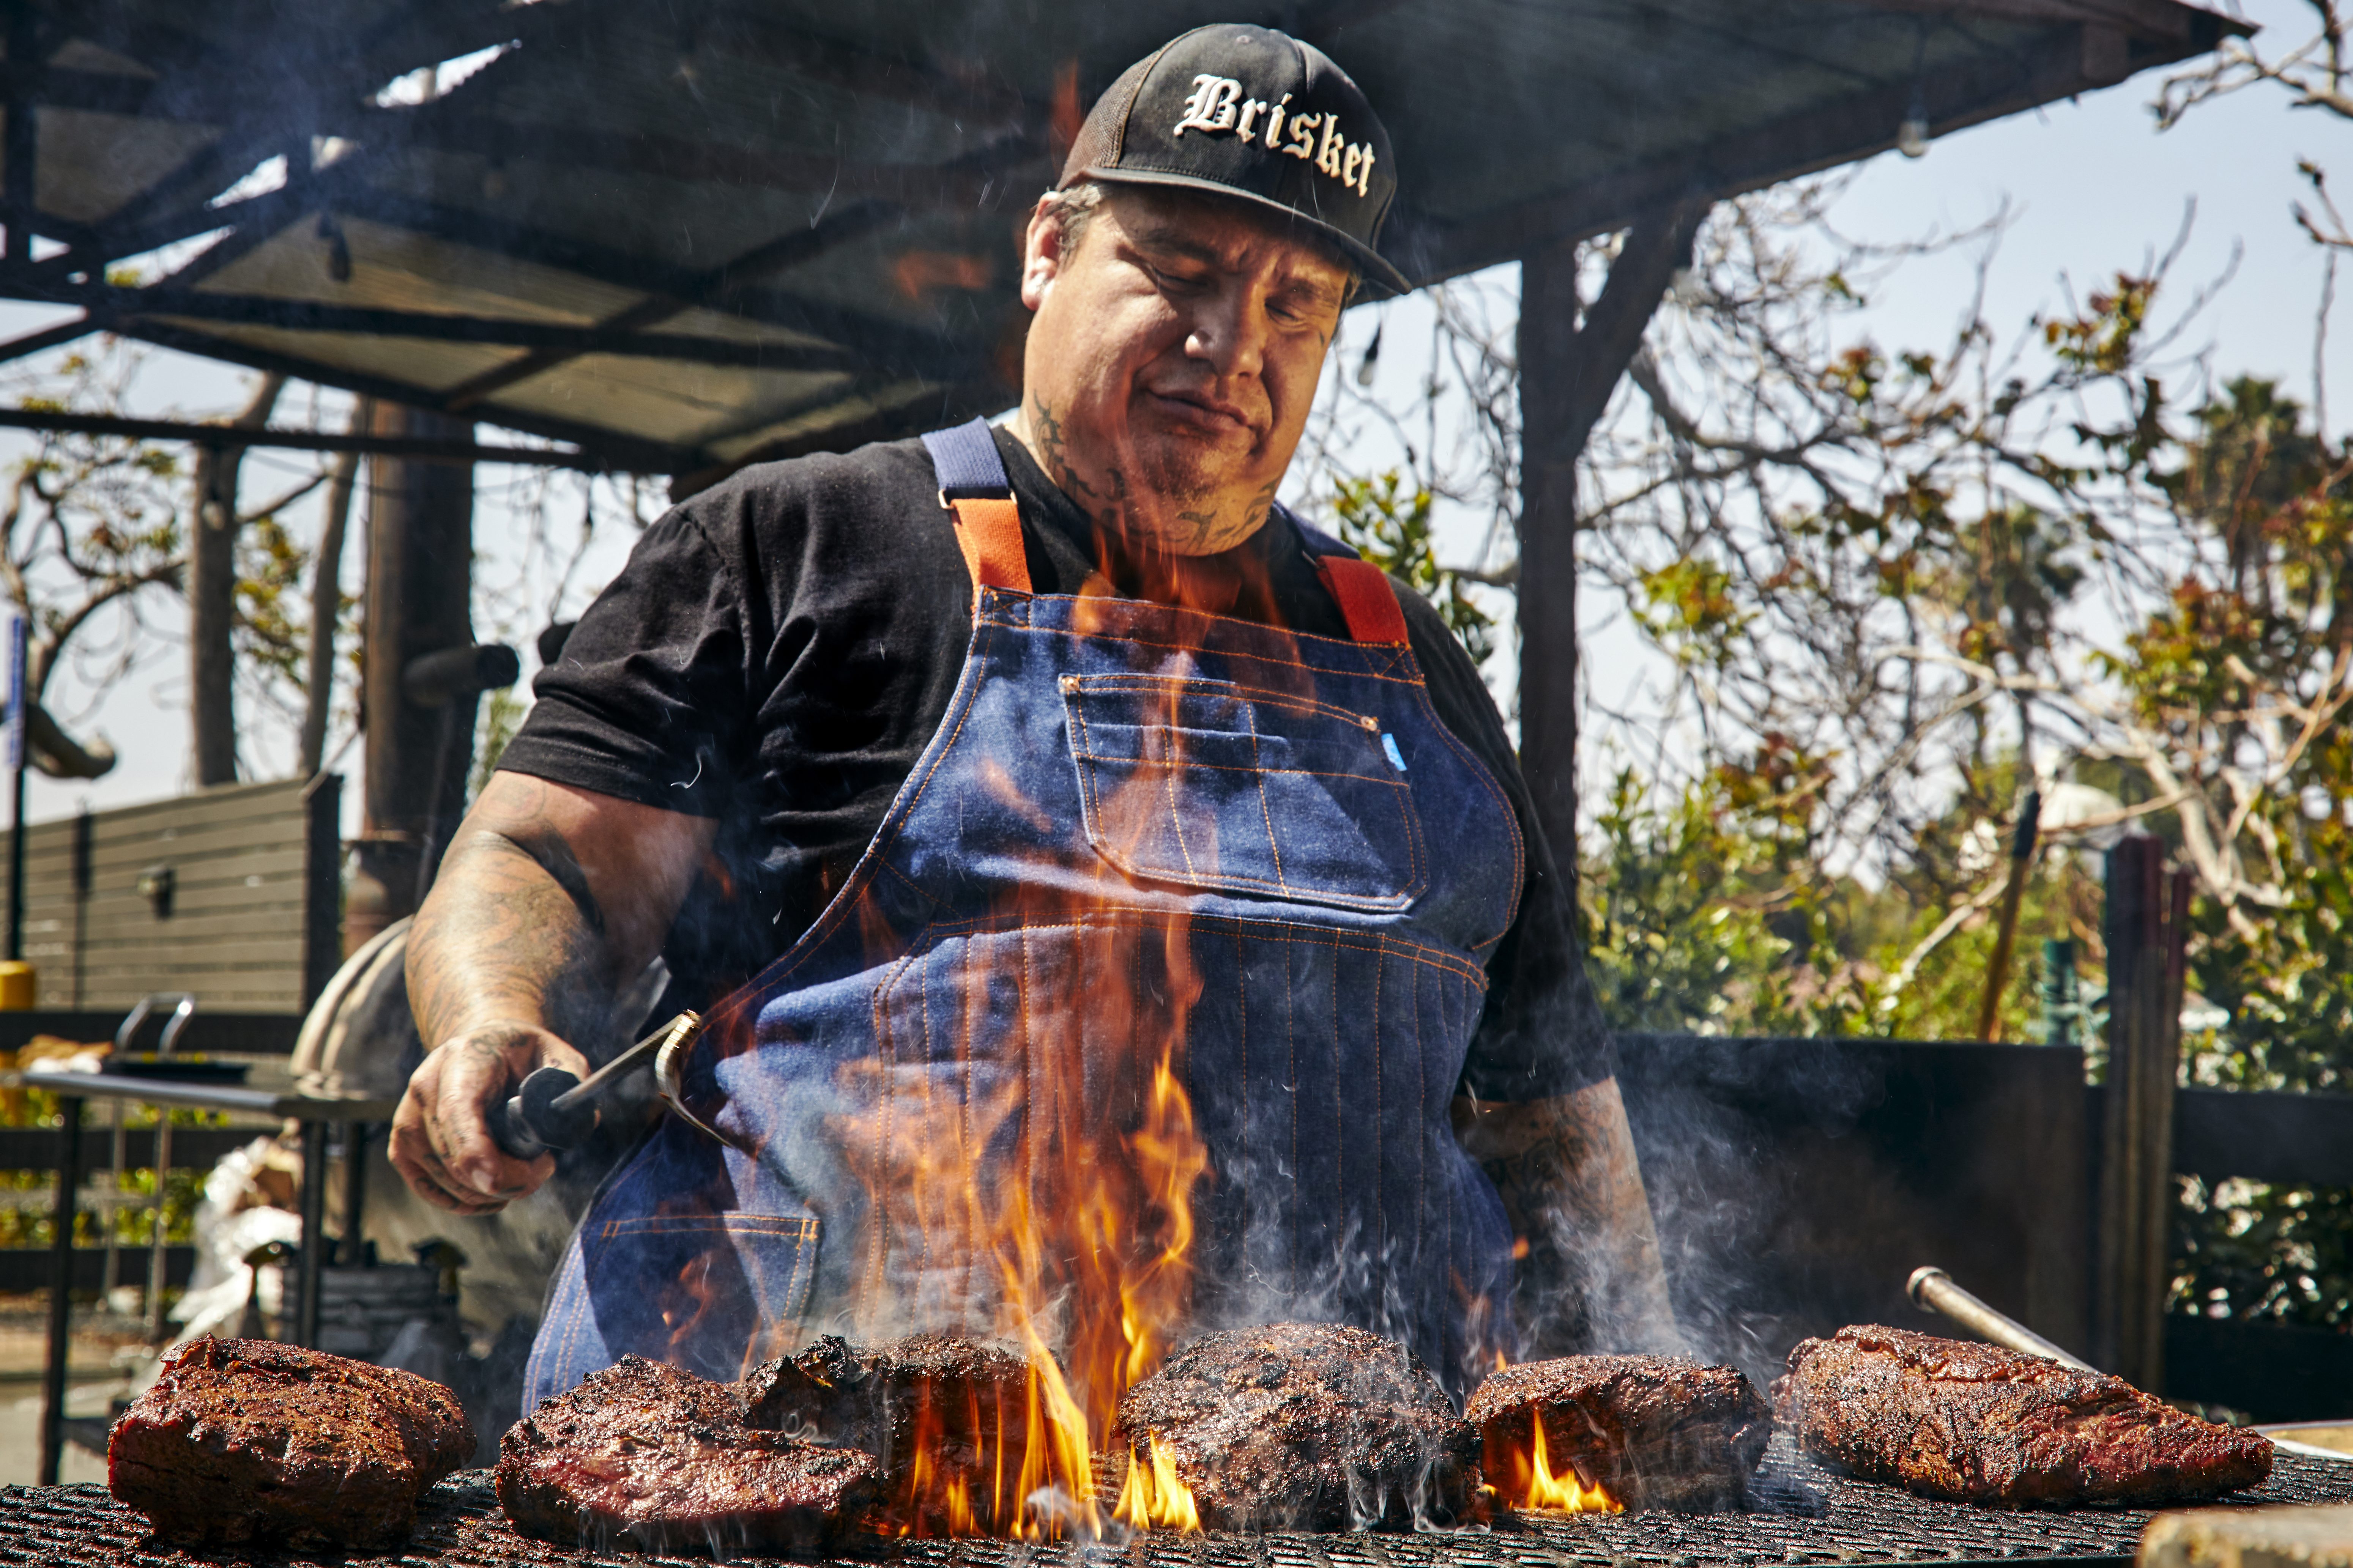 Californias Offset Smoking King Just Helped Create BBQs Ultimate Accessory